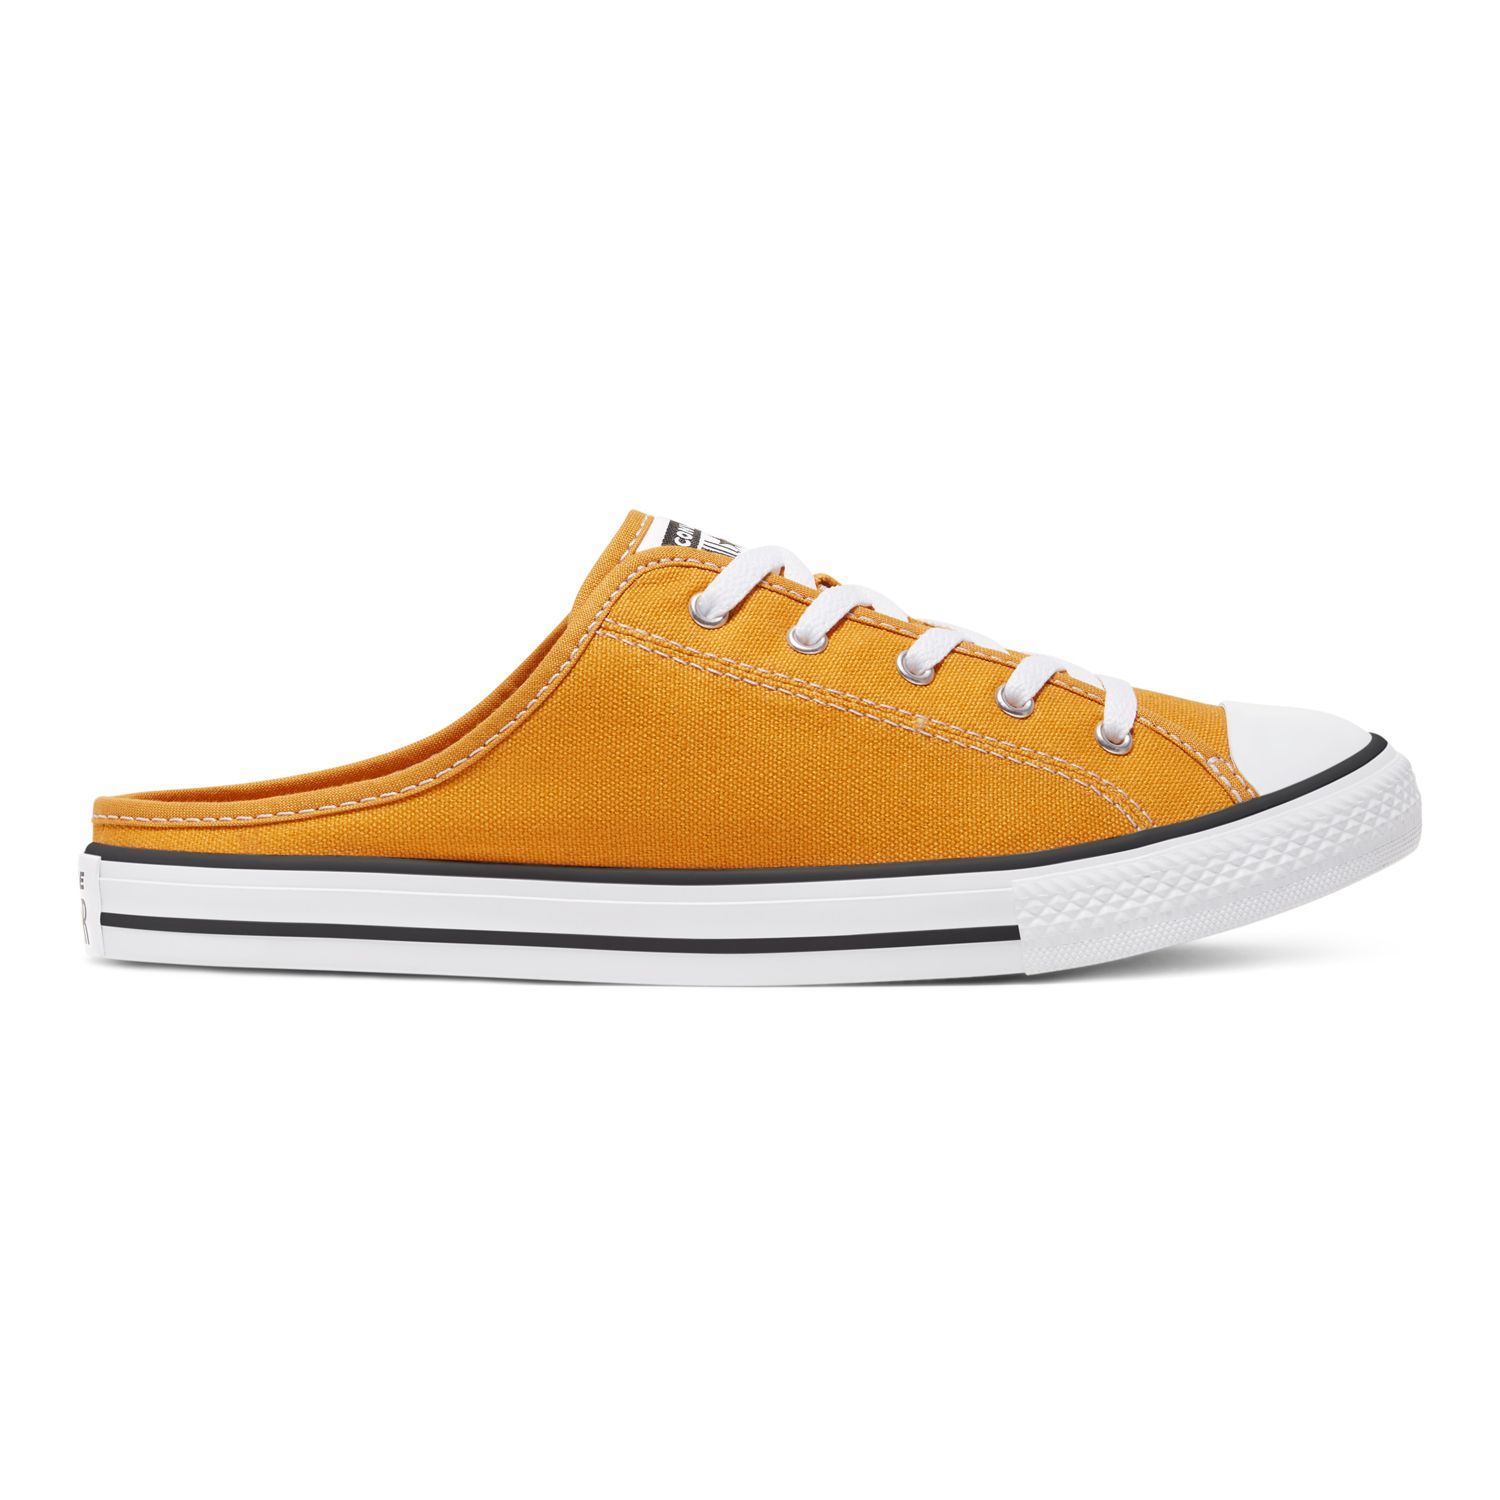 converse chuck taylor all star dainty sneakers